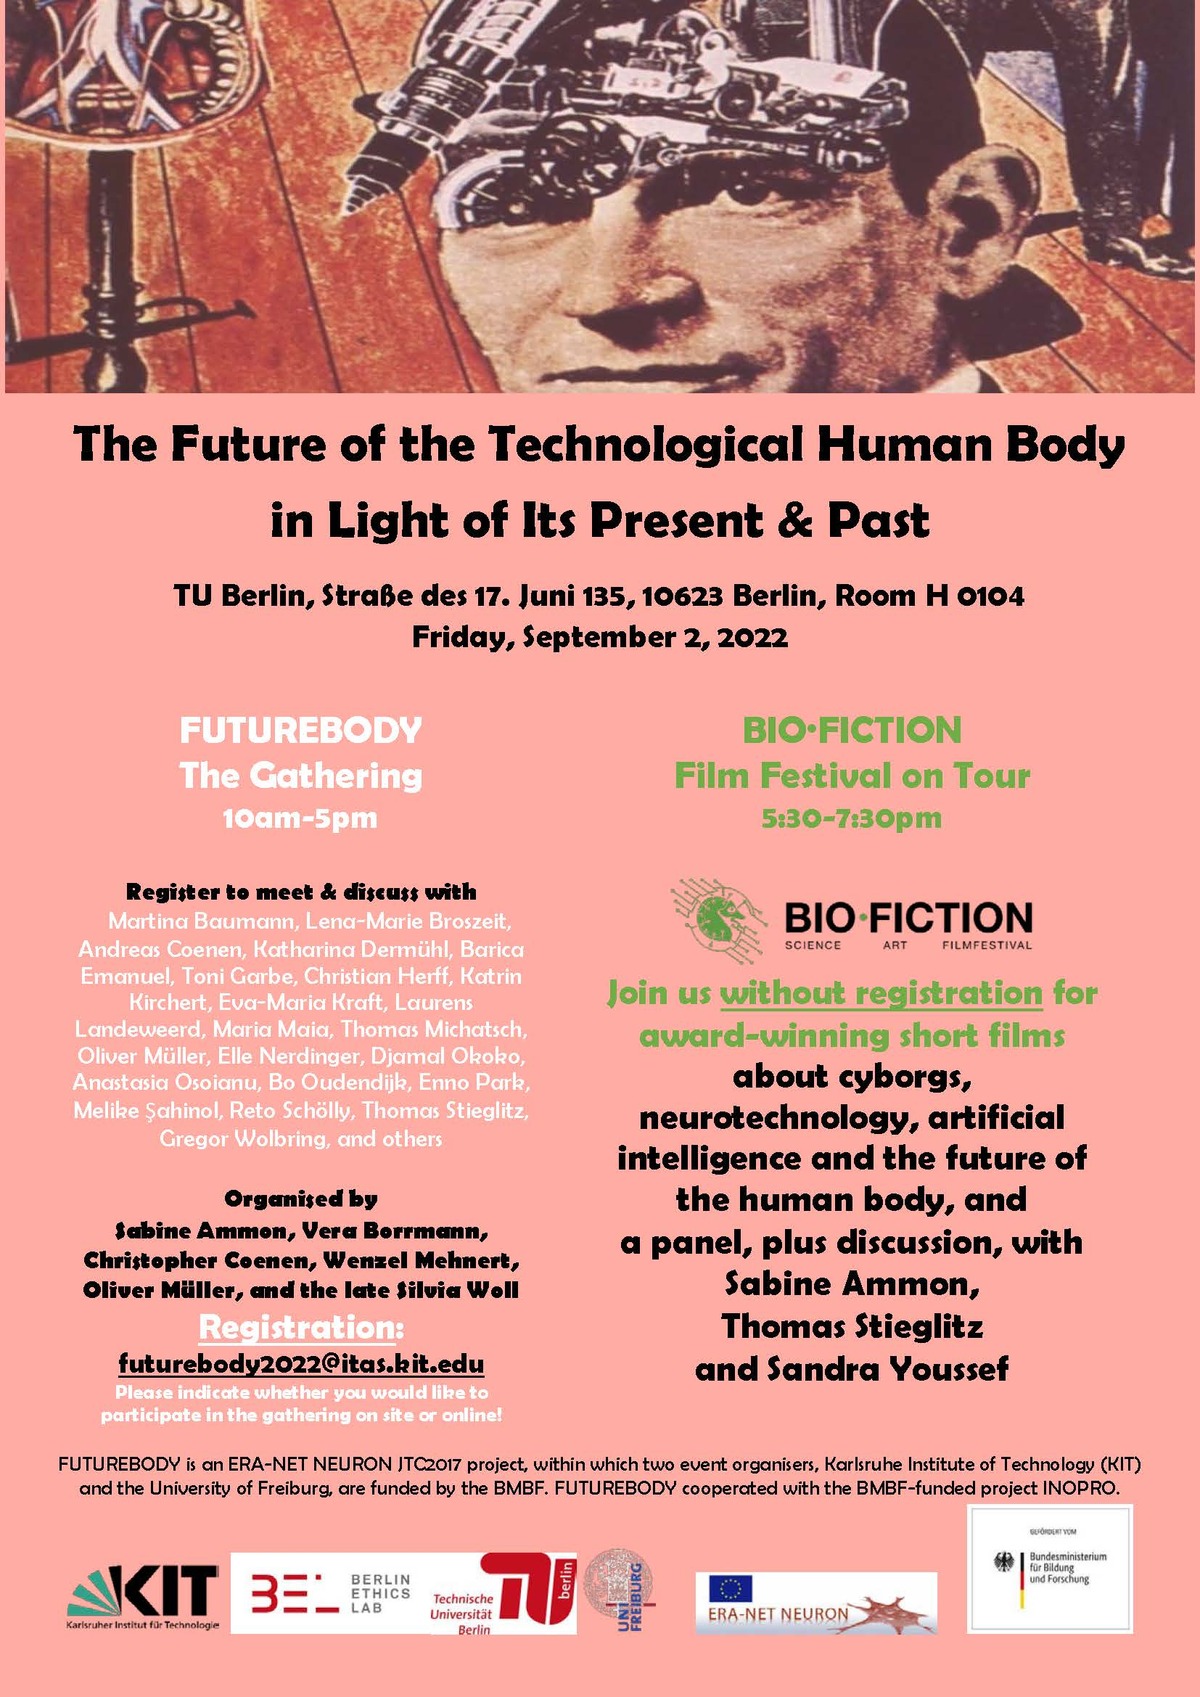 Event poster with the title "The Future of the Technological Human Body in Light of Its Present & Past"